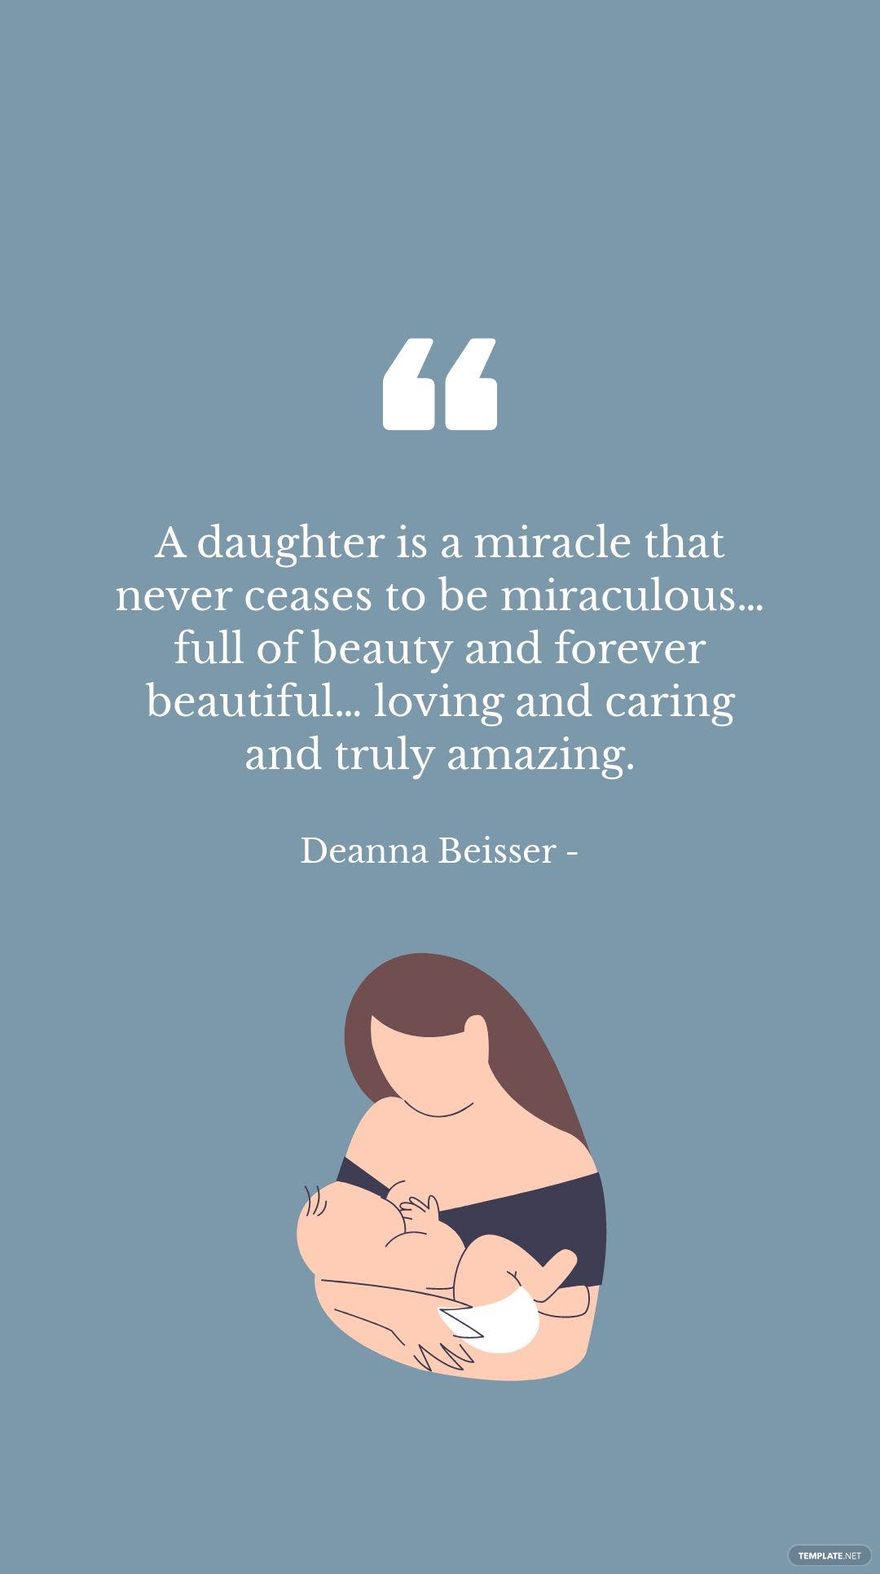 DEANNA BEISSER - A daughter is a miracle that never ceases to be miraculous… full of beauty and forever beautiful… loving and caring and truly amazing.